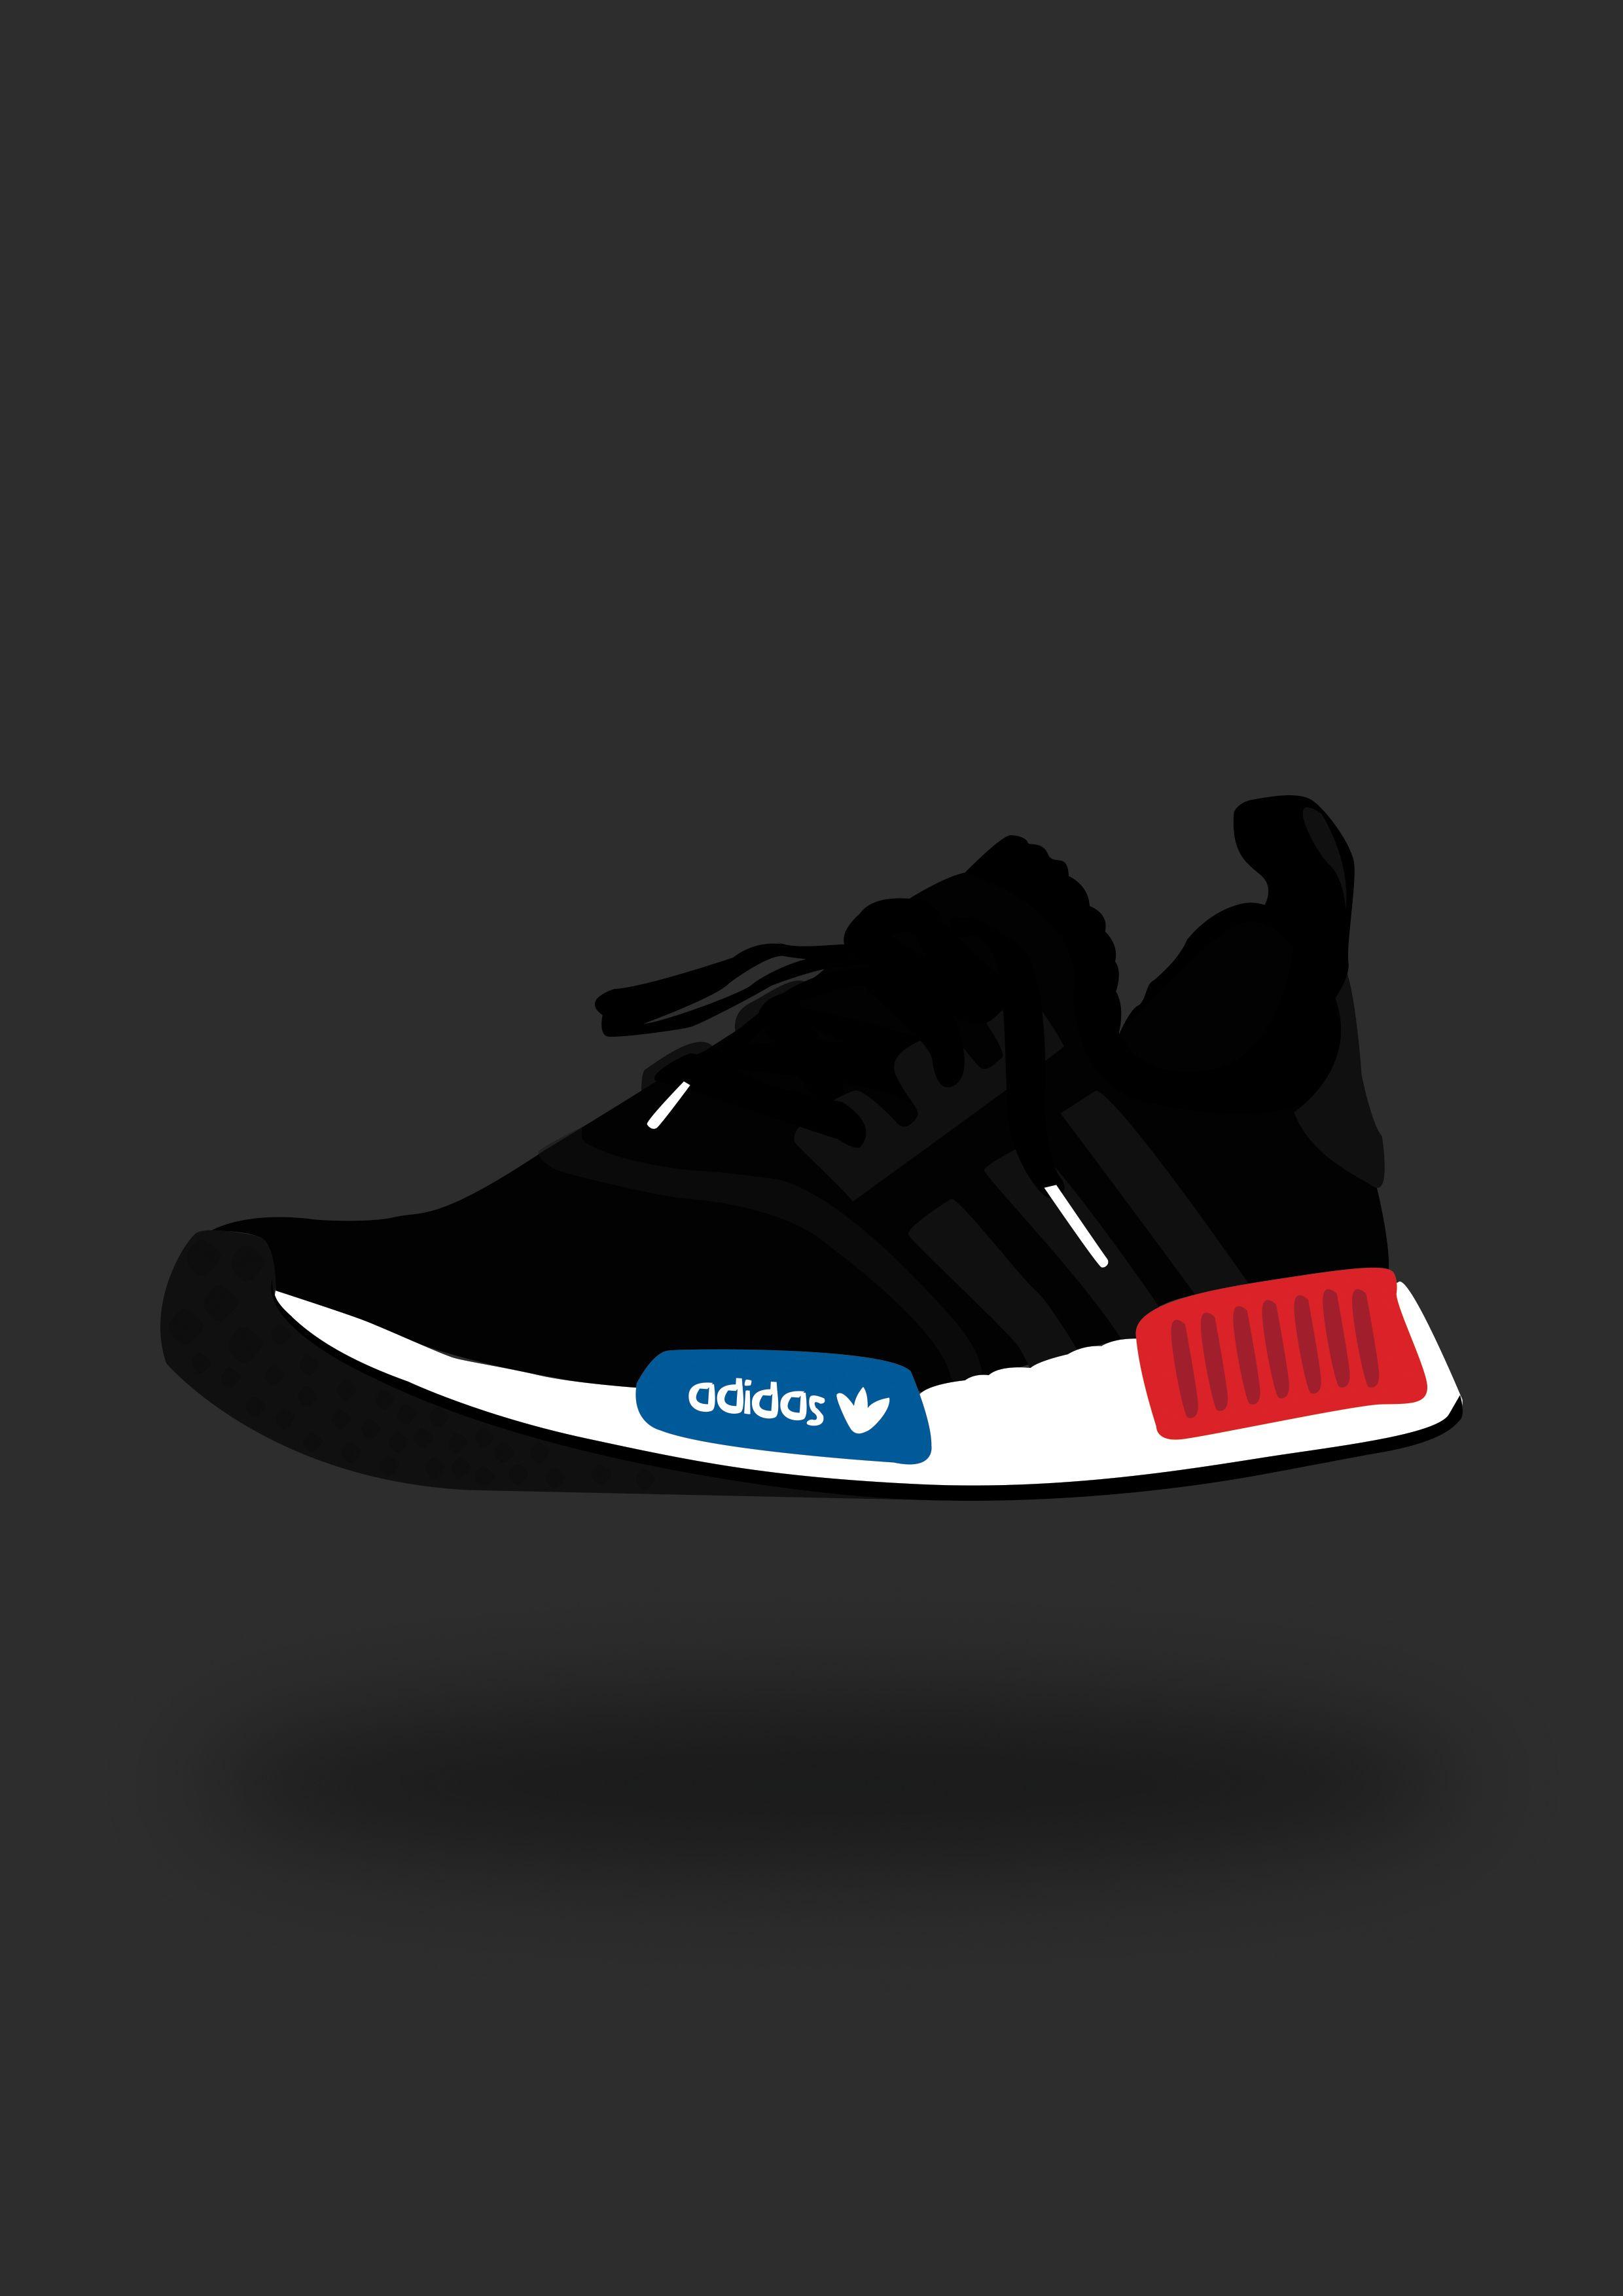 NMD Wallpapers - Wallpaper Cave